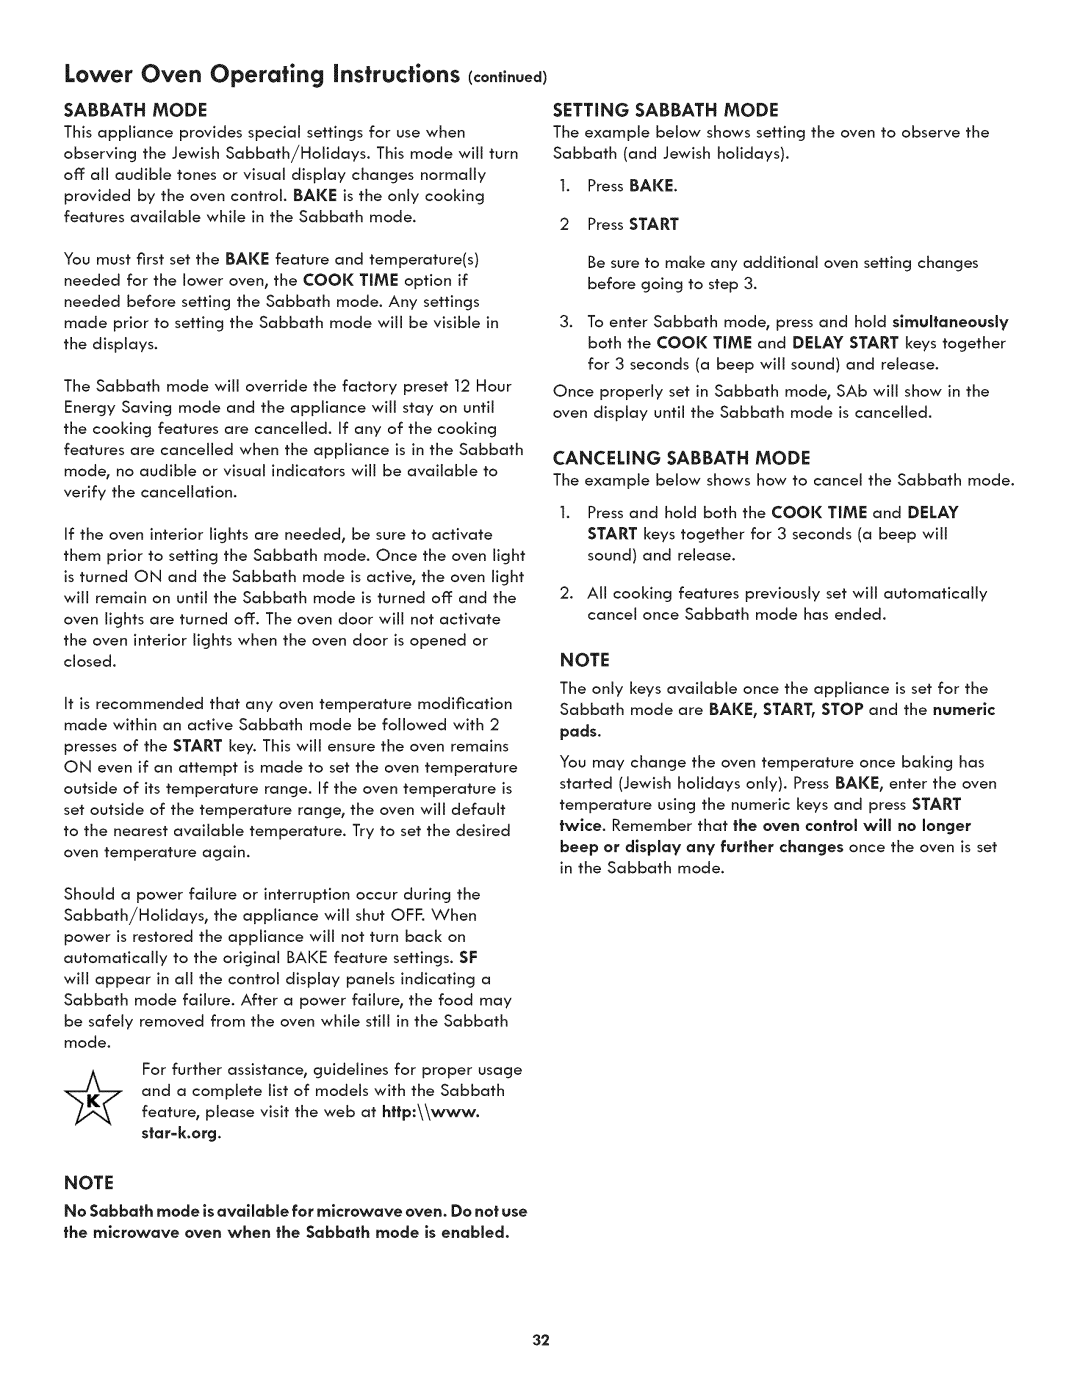 Kenmore 790.489 manual Lower Oven Operating instructions continued, Setting Sabbath Mode, Canceling Sabbath Mode, pods 